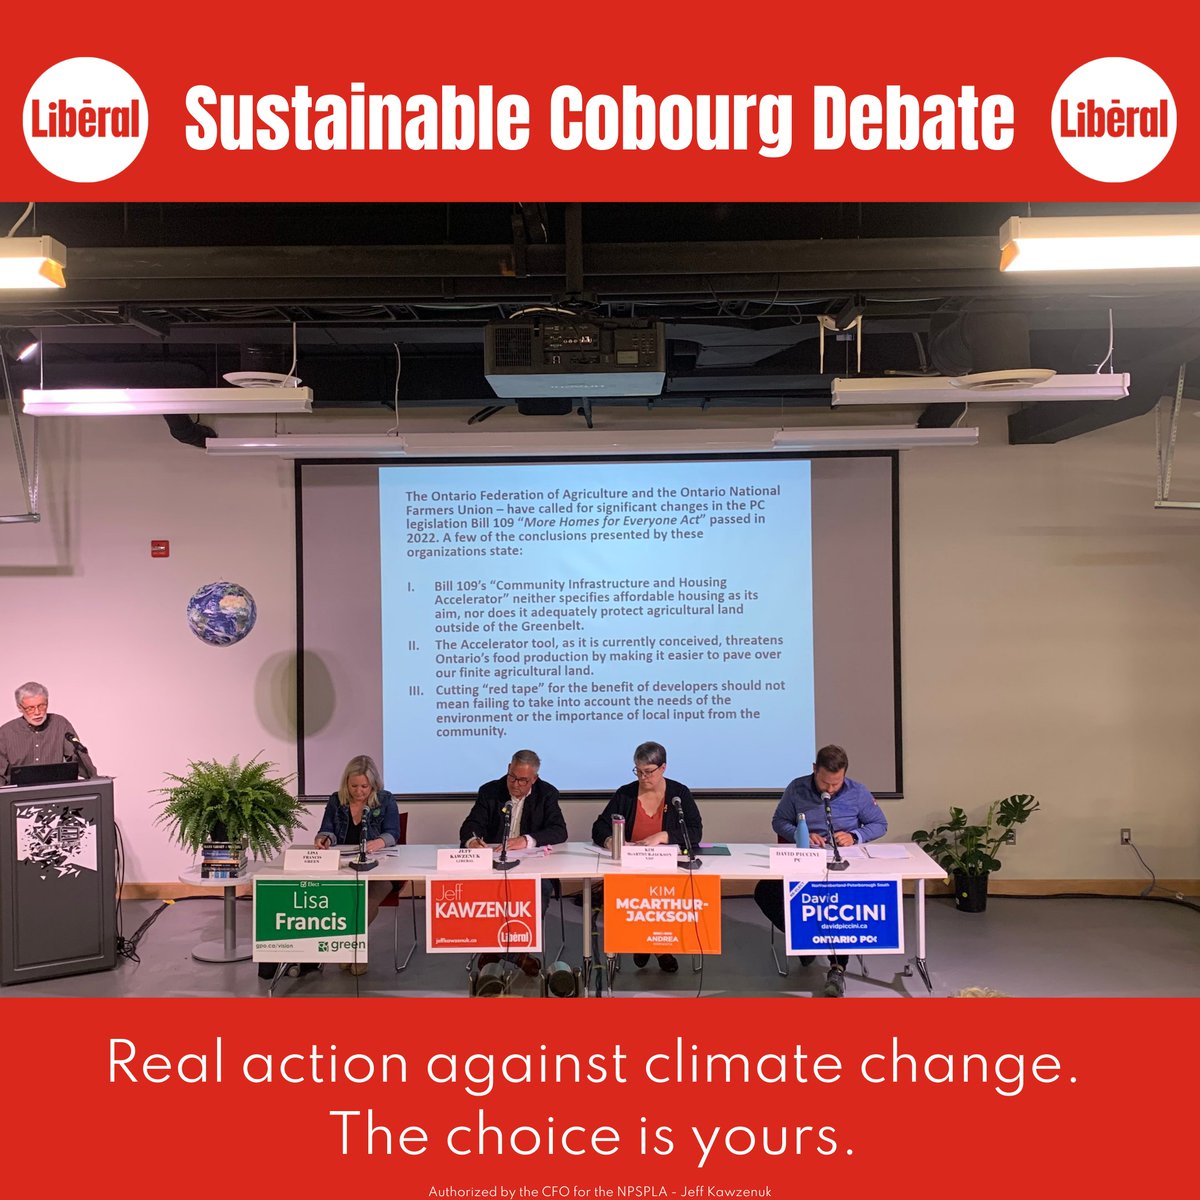 It was an honour to attend the @greencobourg debate to discuss sustainability. Thank you to all those who attended. Climate change is the most pressing issue facing the world, and @OntLiberal will take aggressive action after 4 years of neglect from the Ford/Piccini government.